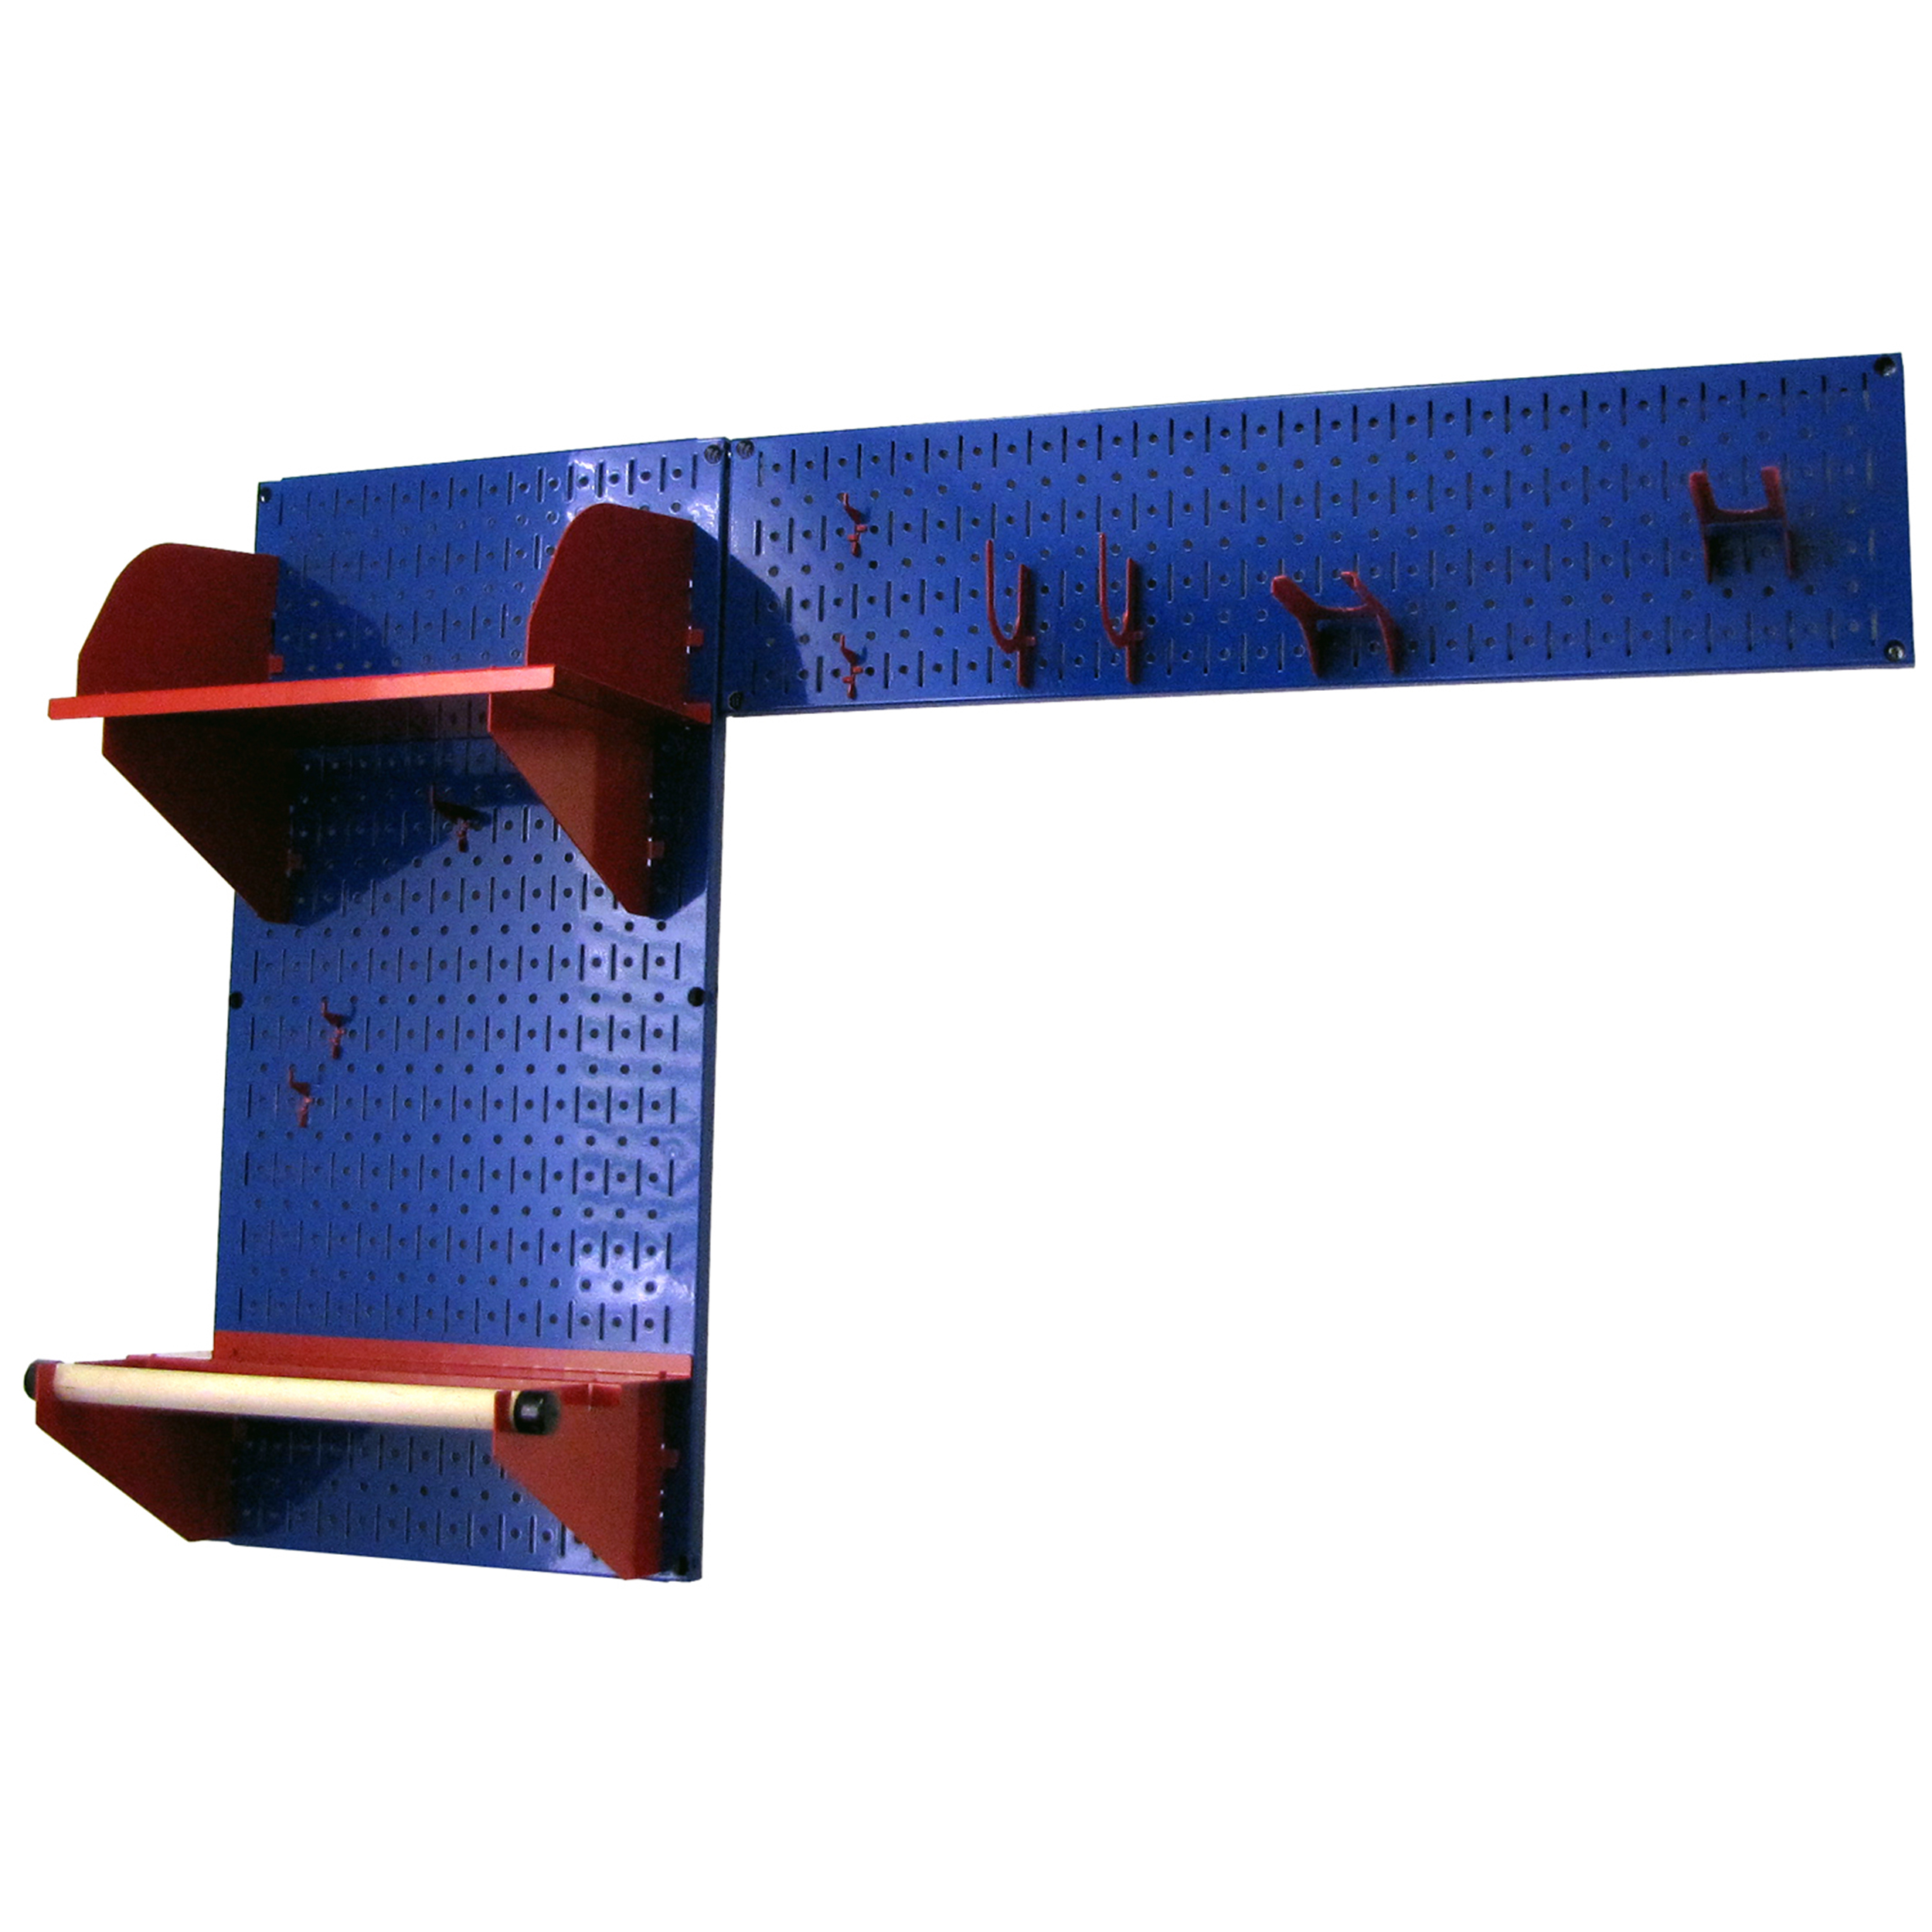 Pegboard Garden Tool Board Organizer With Blue Pegboard And Red Accessories